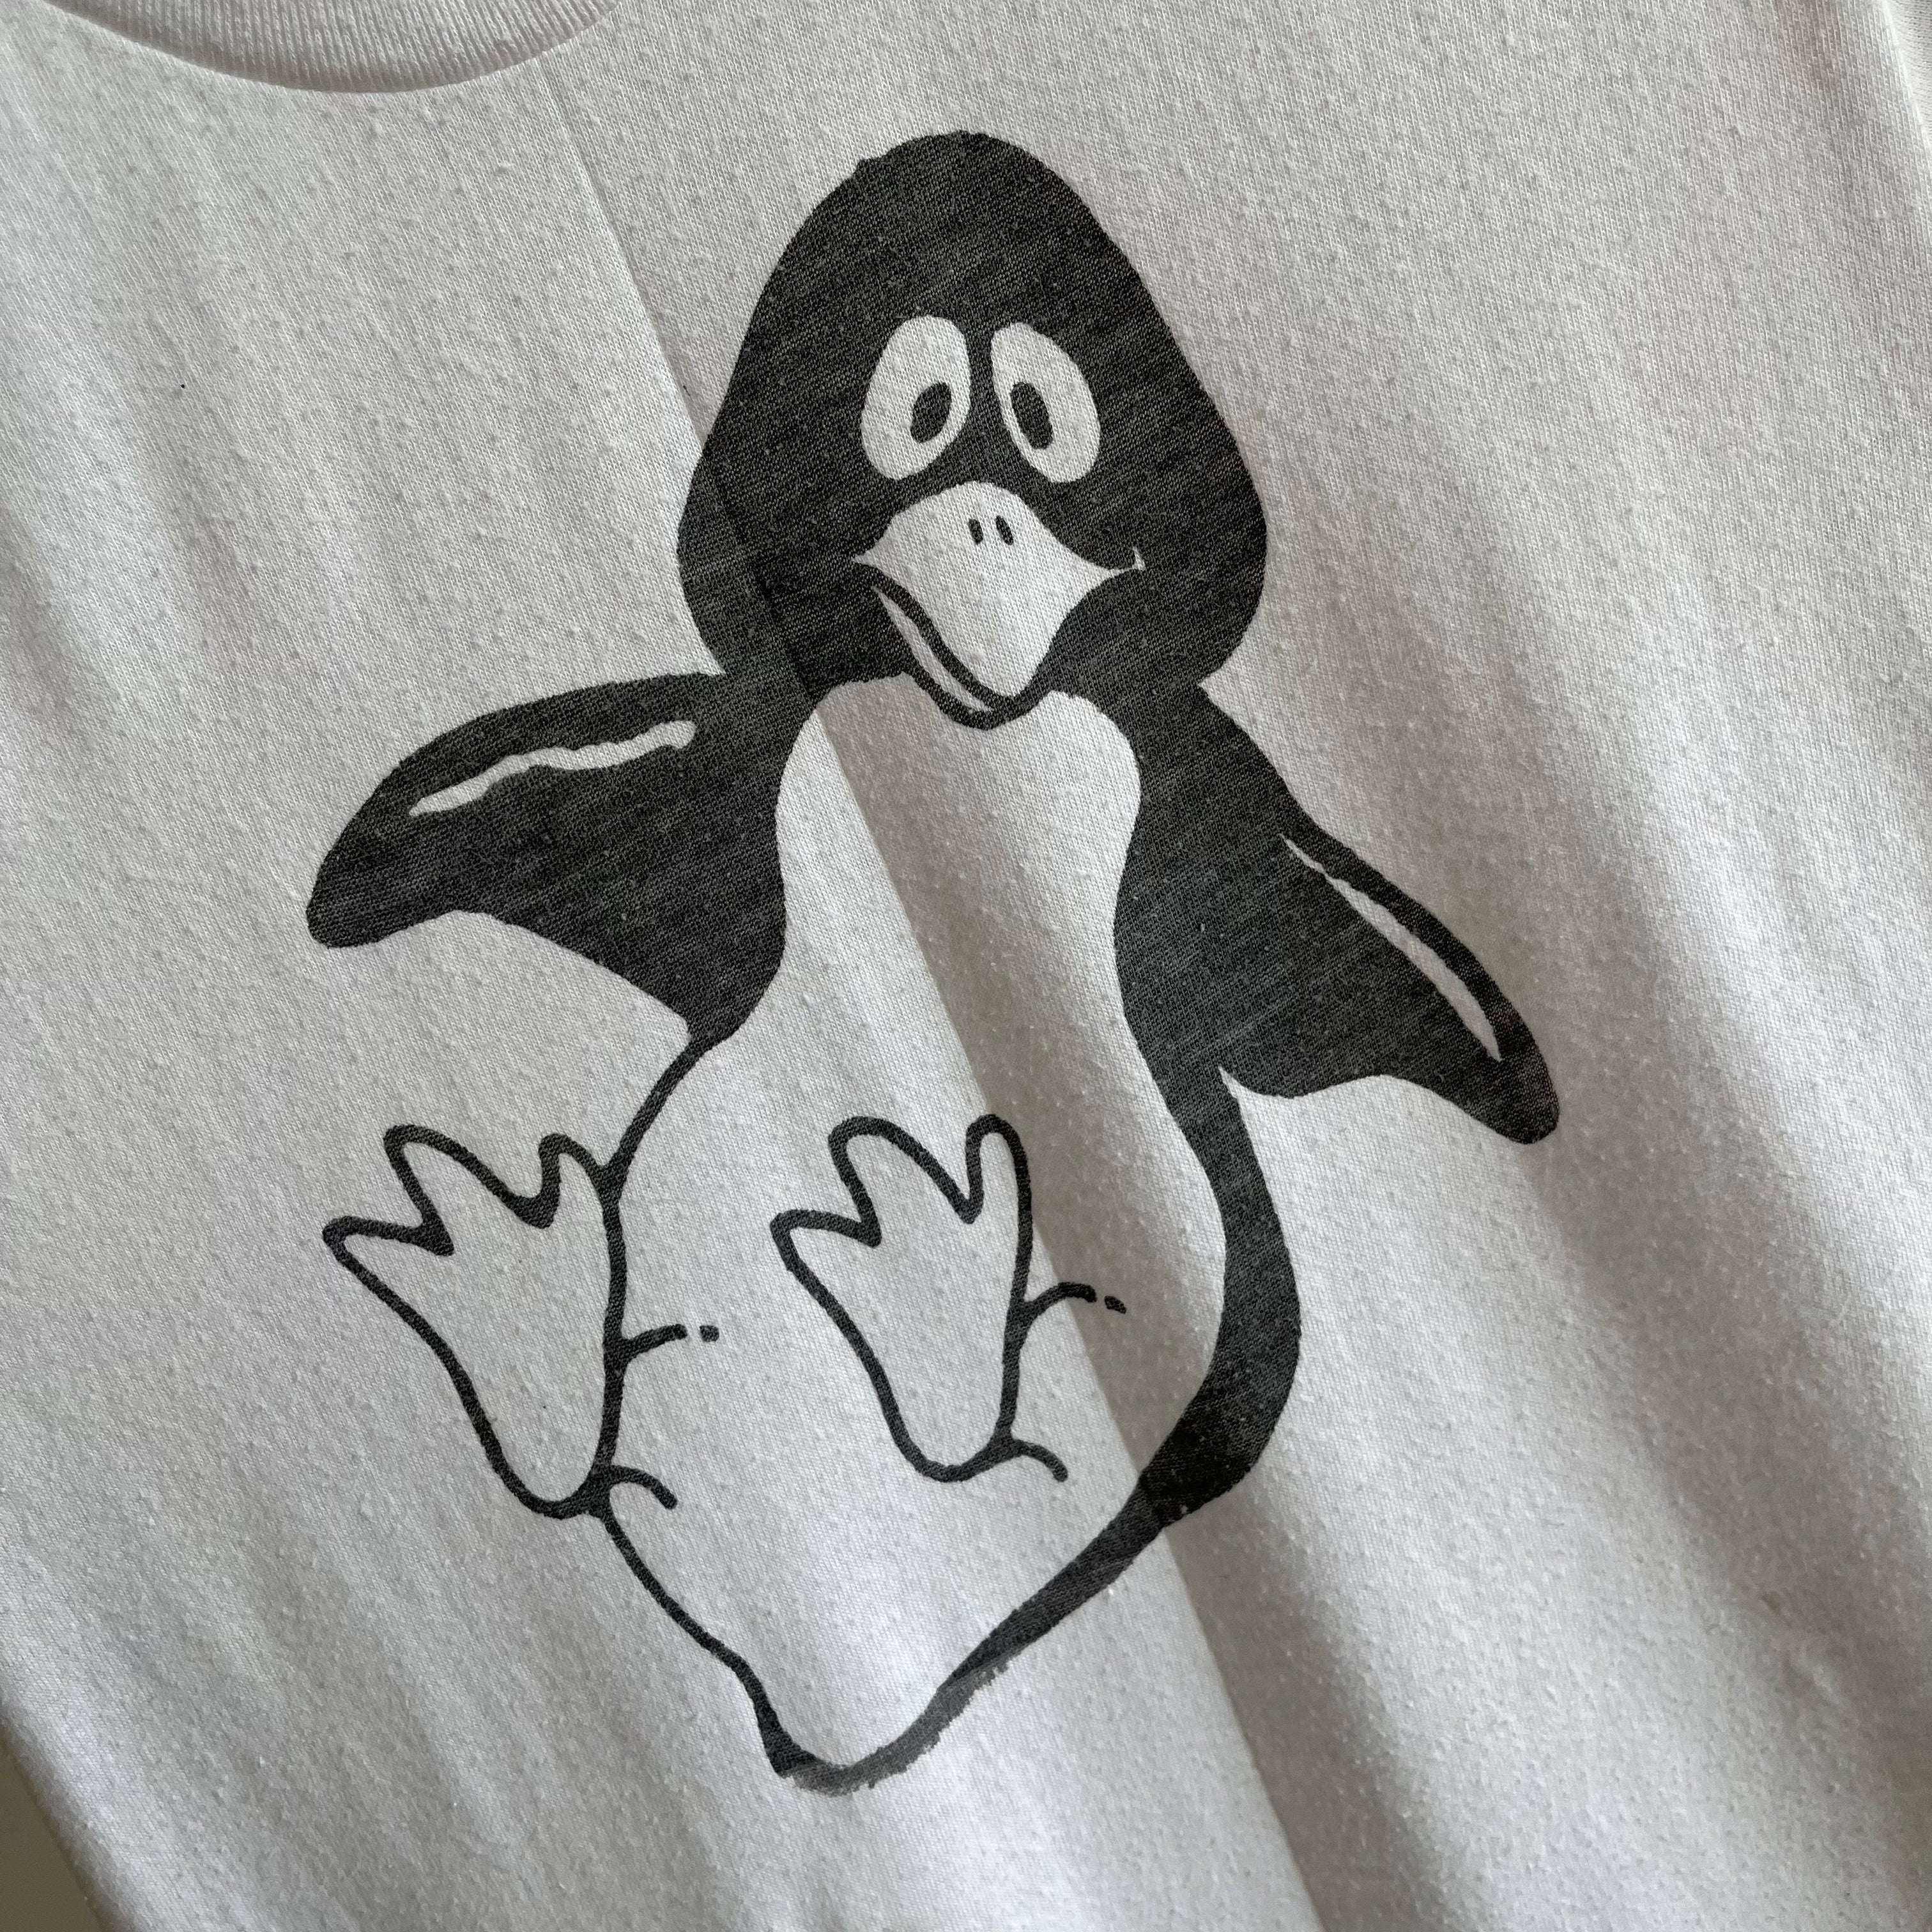 1980s Penguin T-Shirt by Sears